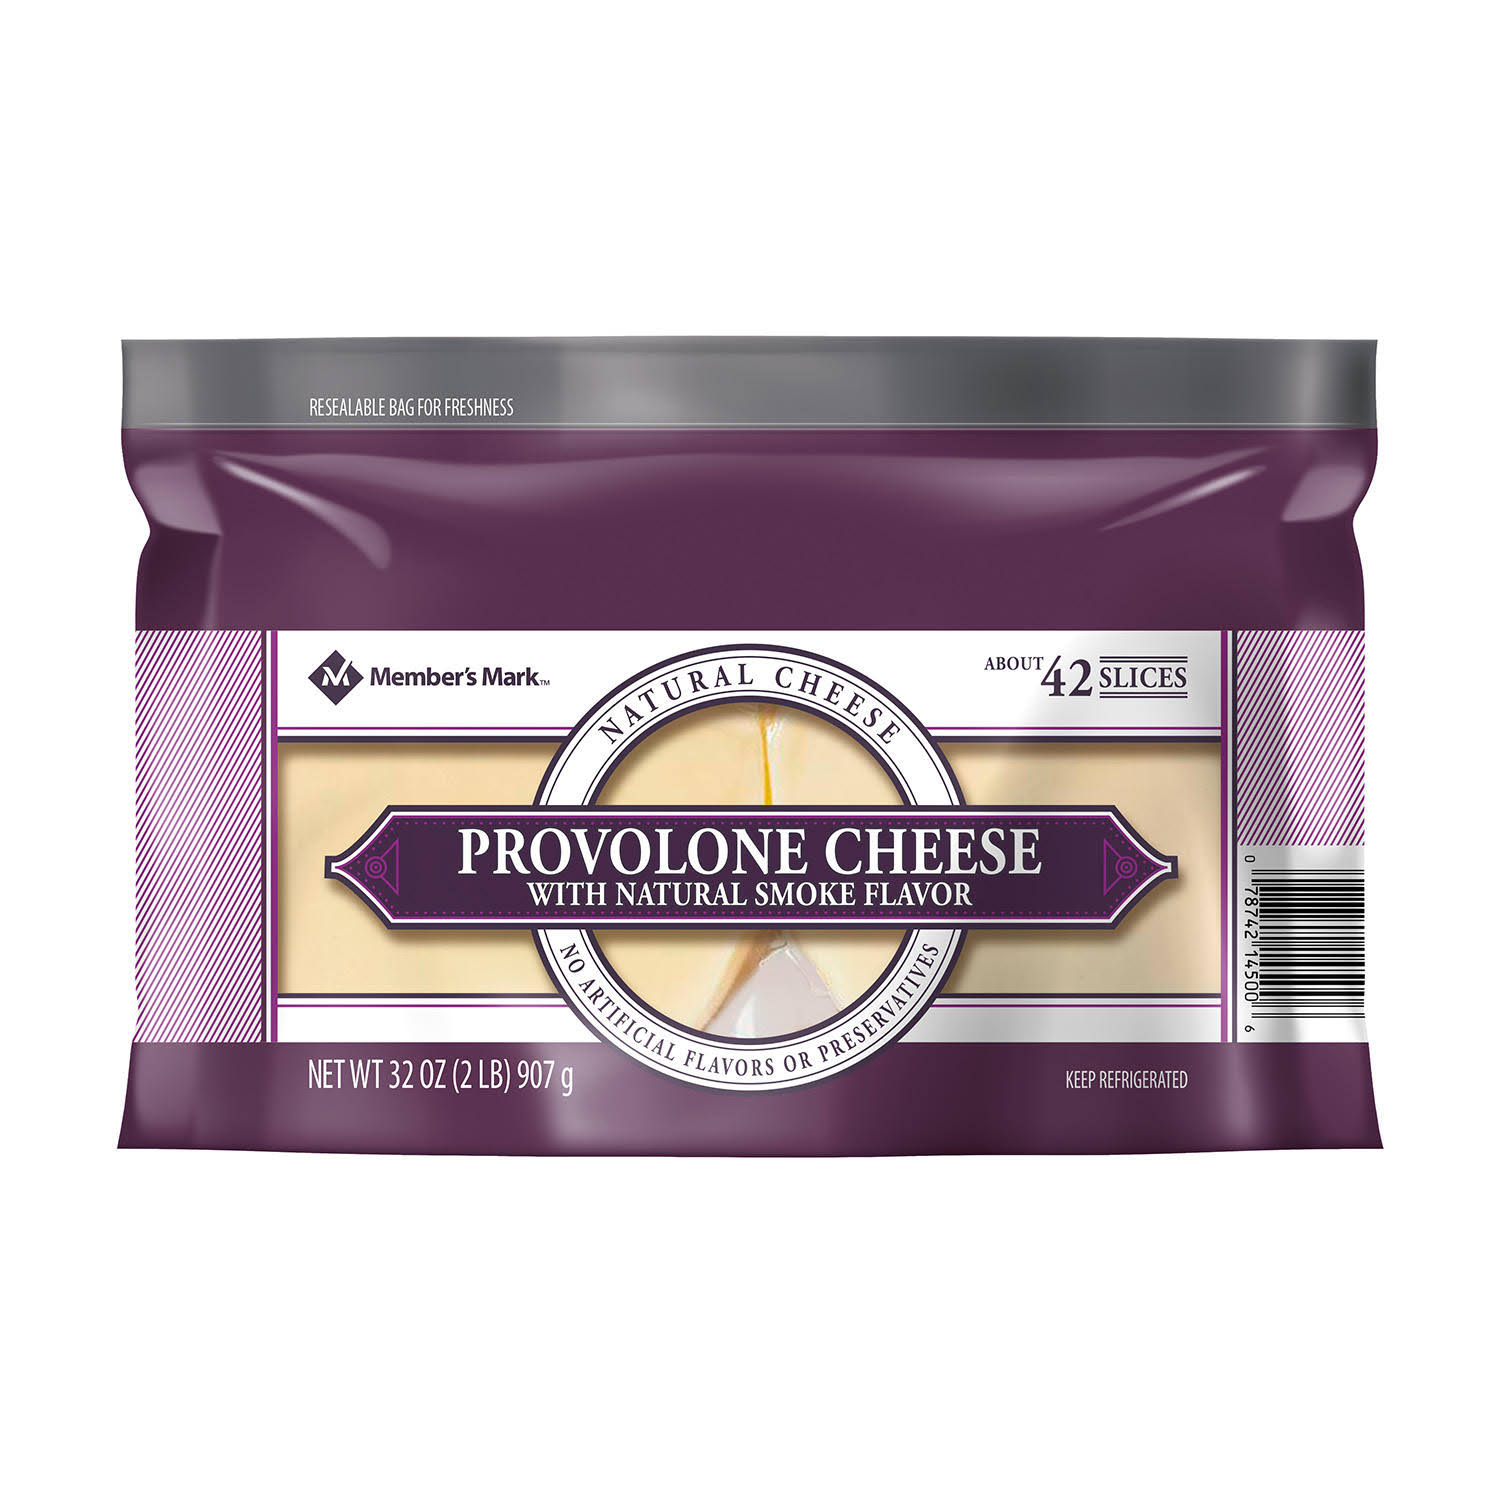 Member's Mark Provolone Cheese with Natural Smoke Flavor